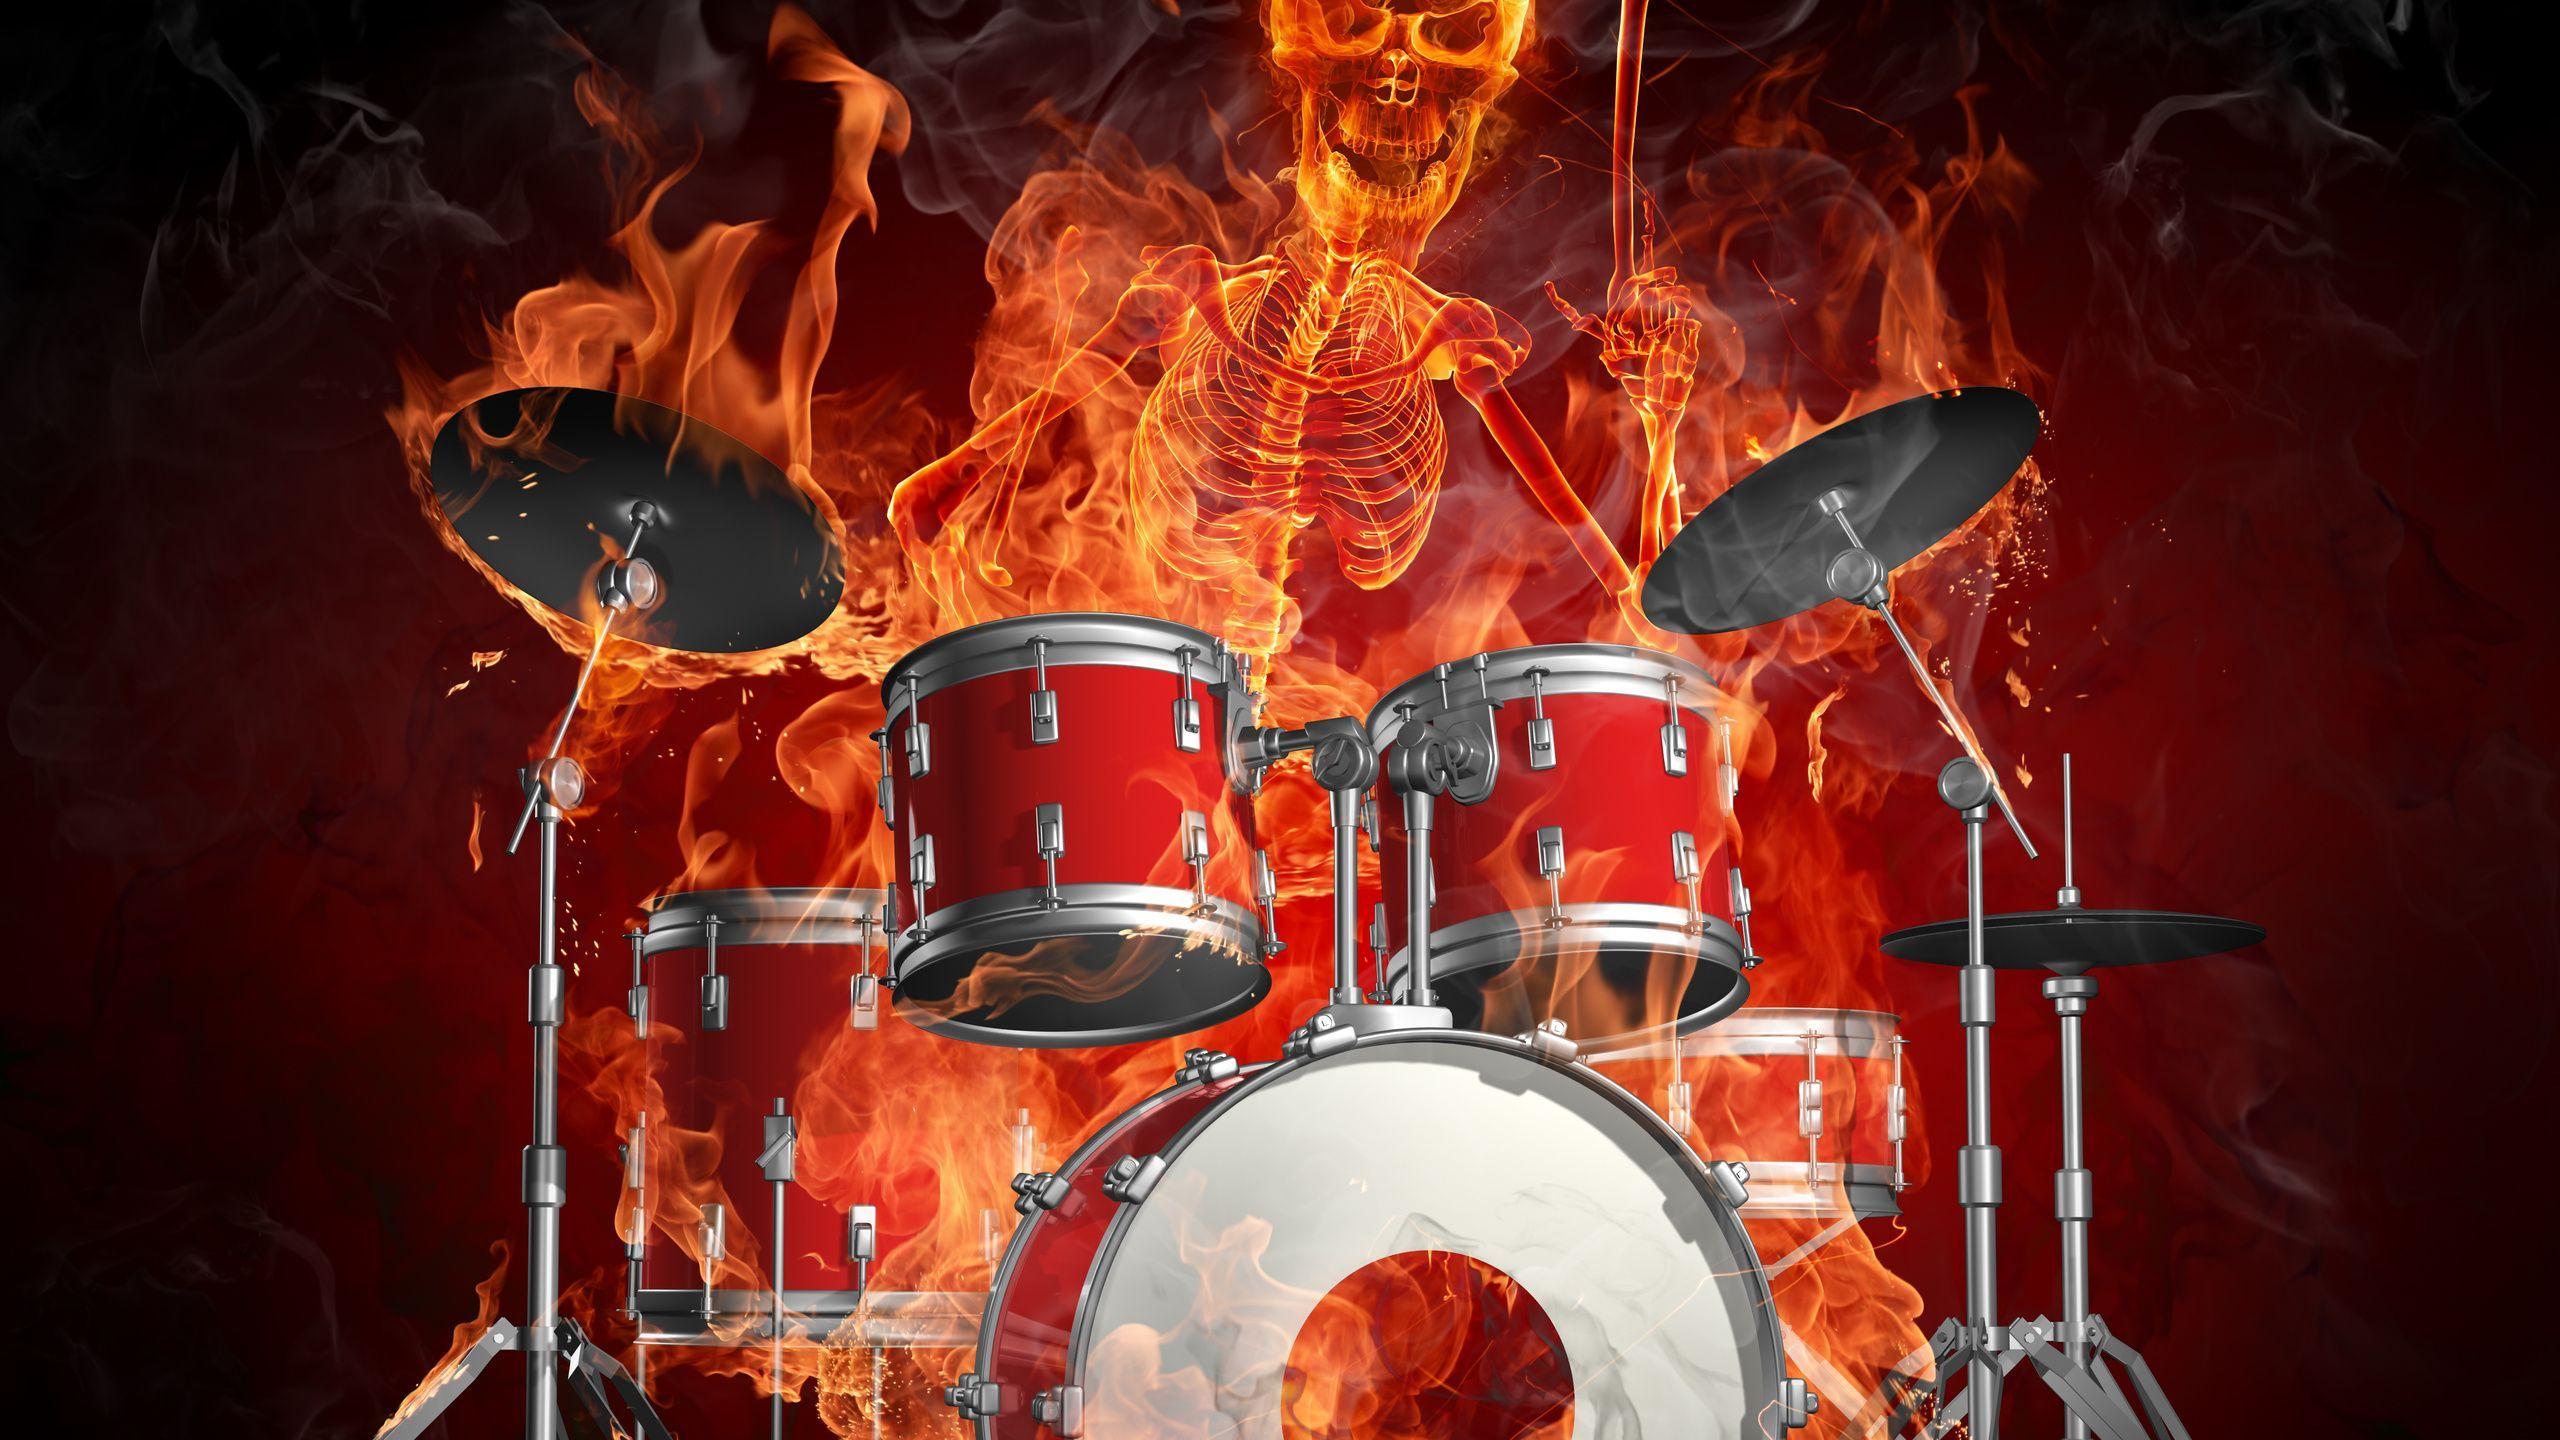 Fire, Flames, Drums, Skeleton Wallpaper and Picture